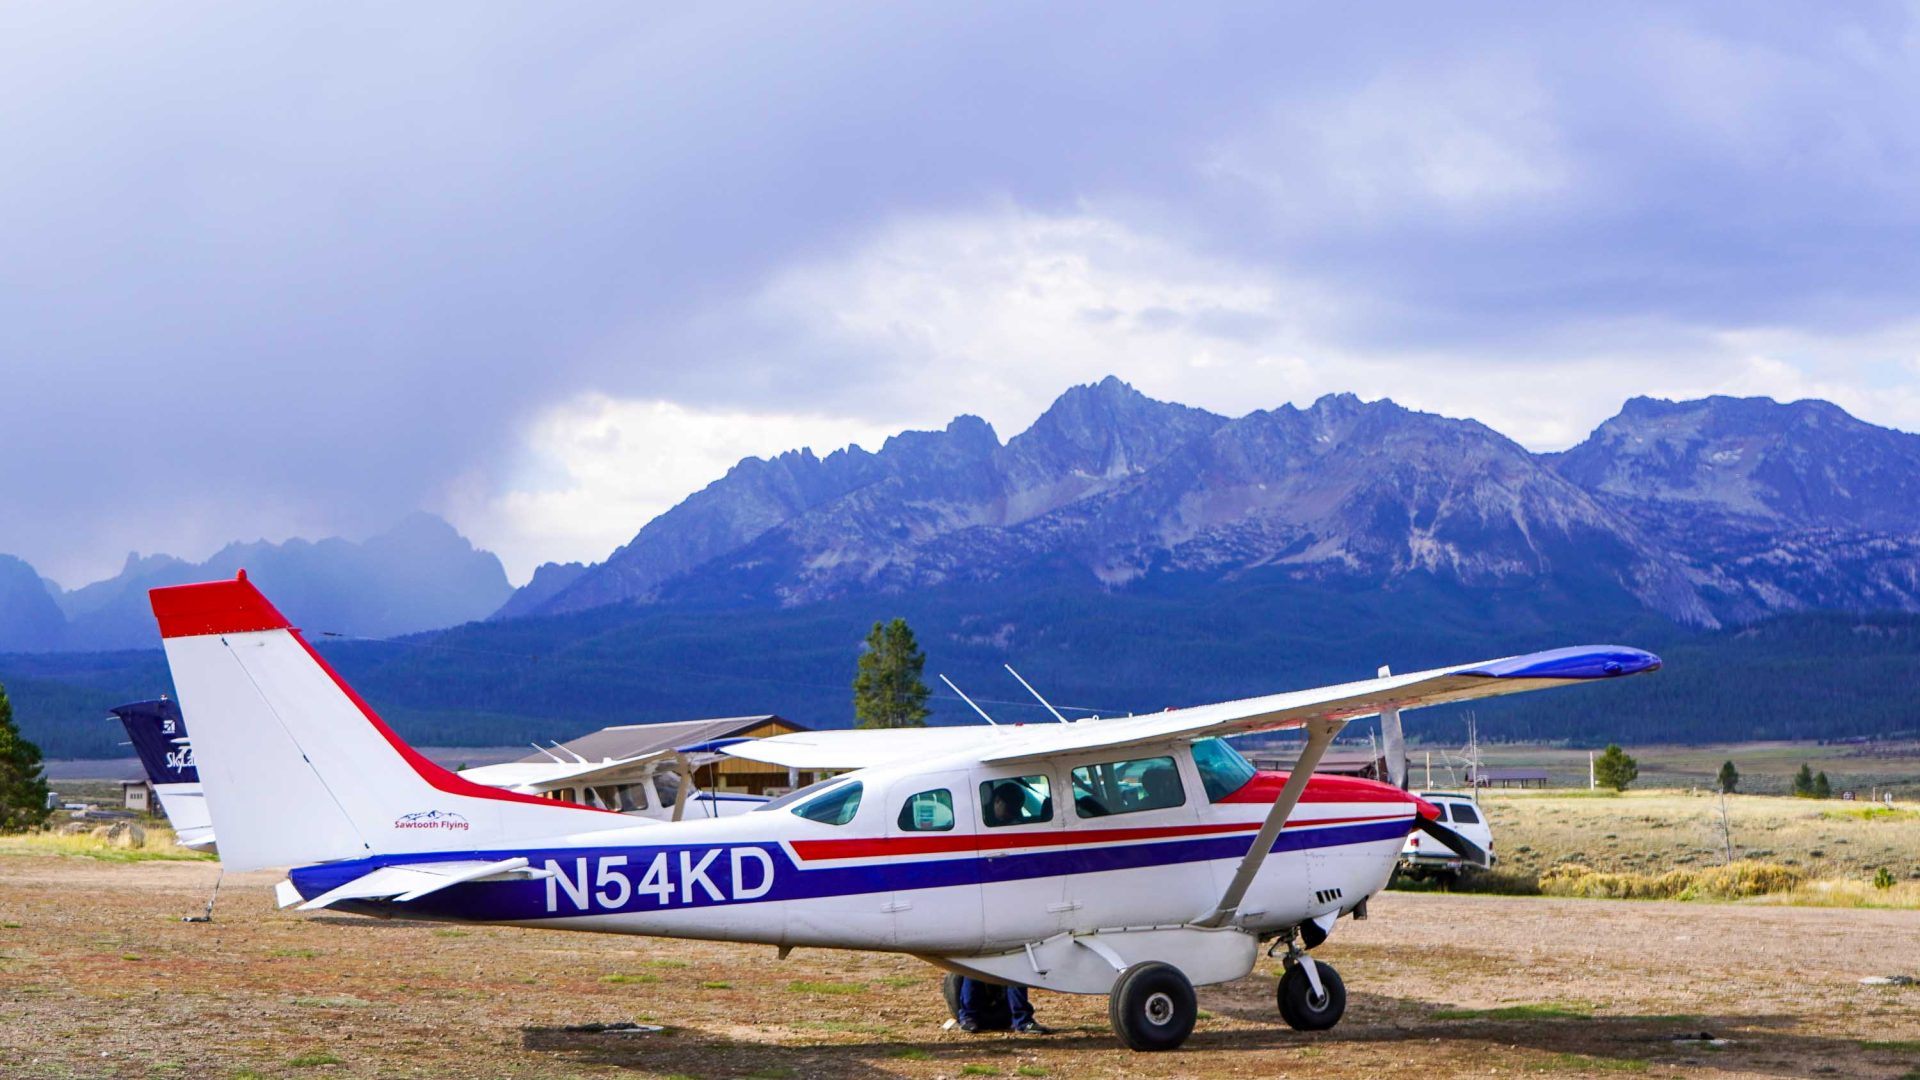 A small plane against a backdrop of tall mountains.